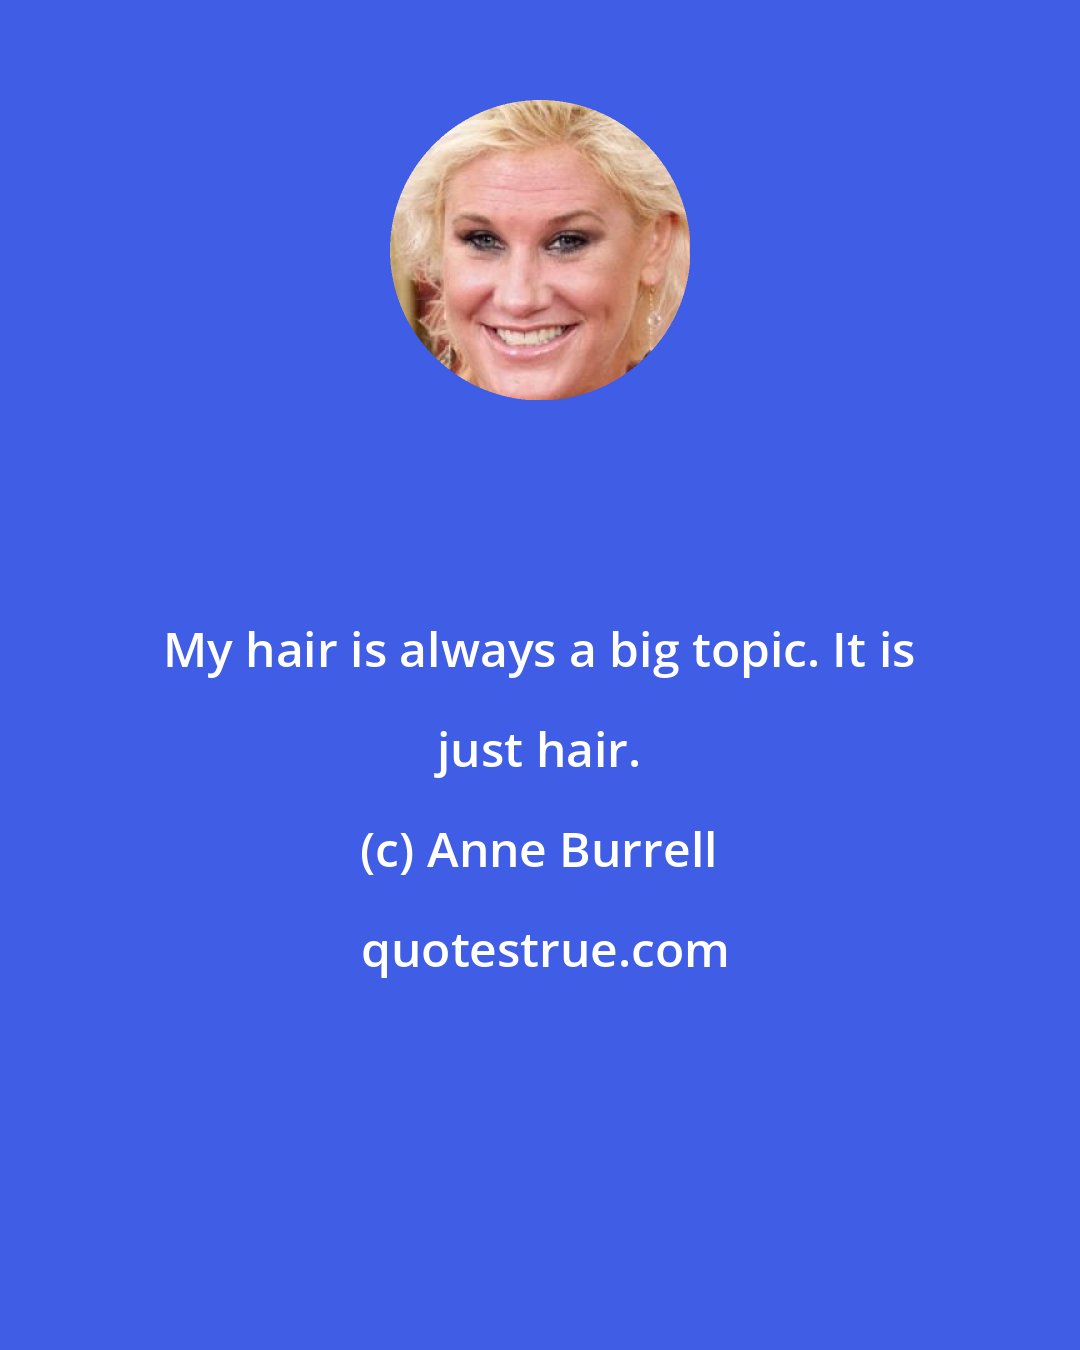 Anne Burrell: My hair is always a big topic. It is just hair.